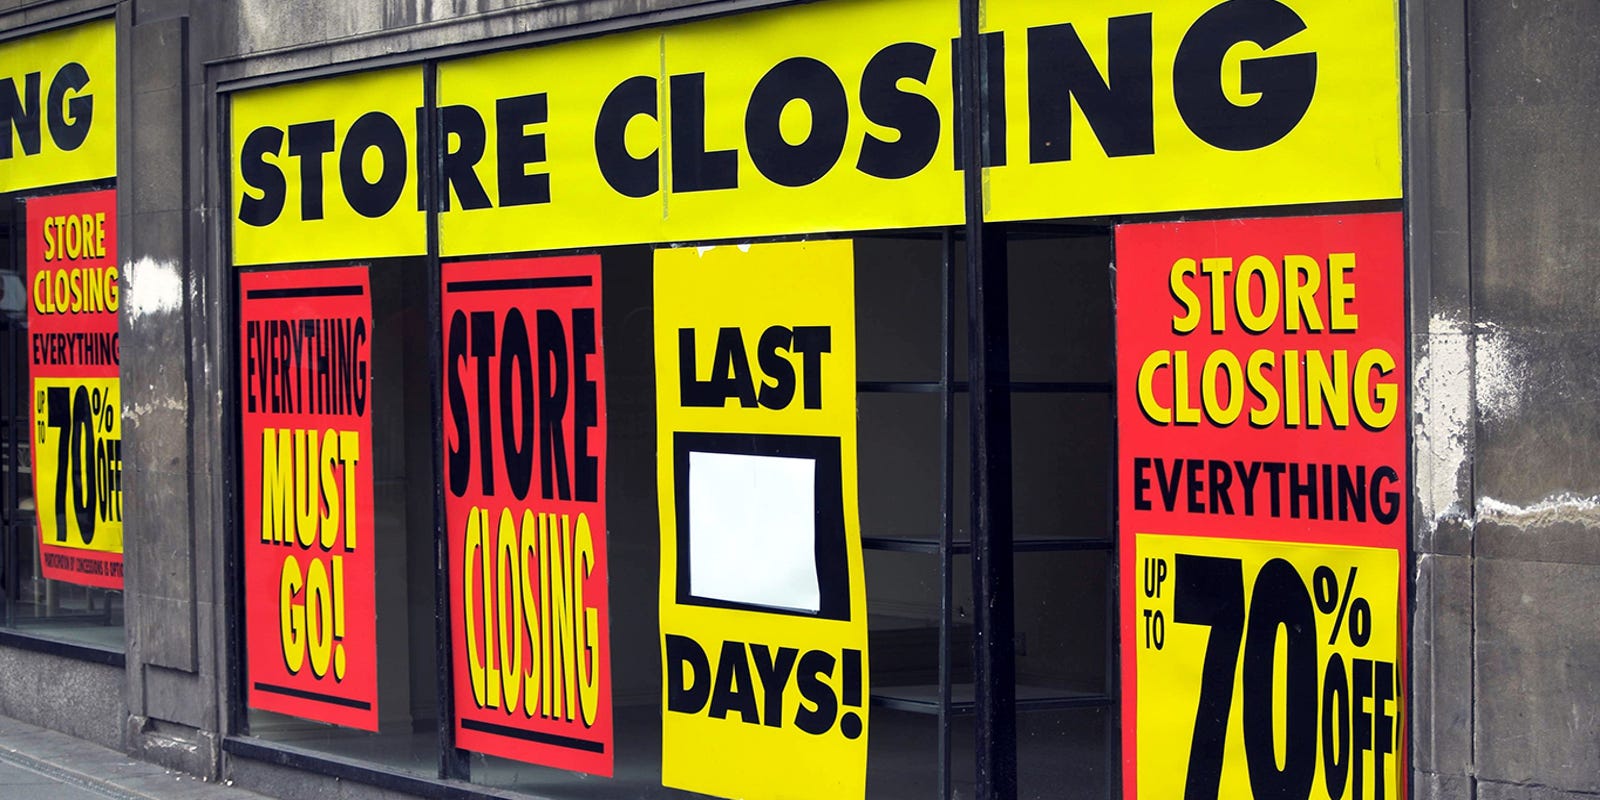 Everything was closed. Closed Store. Closed Stores Downtwon.